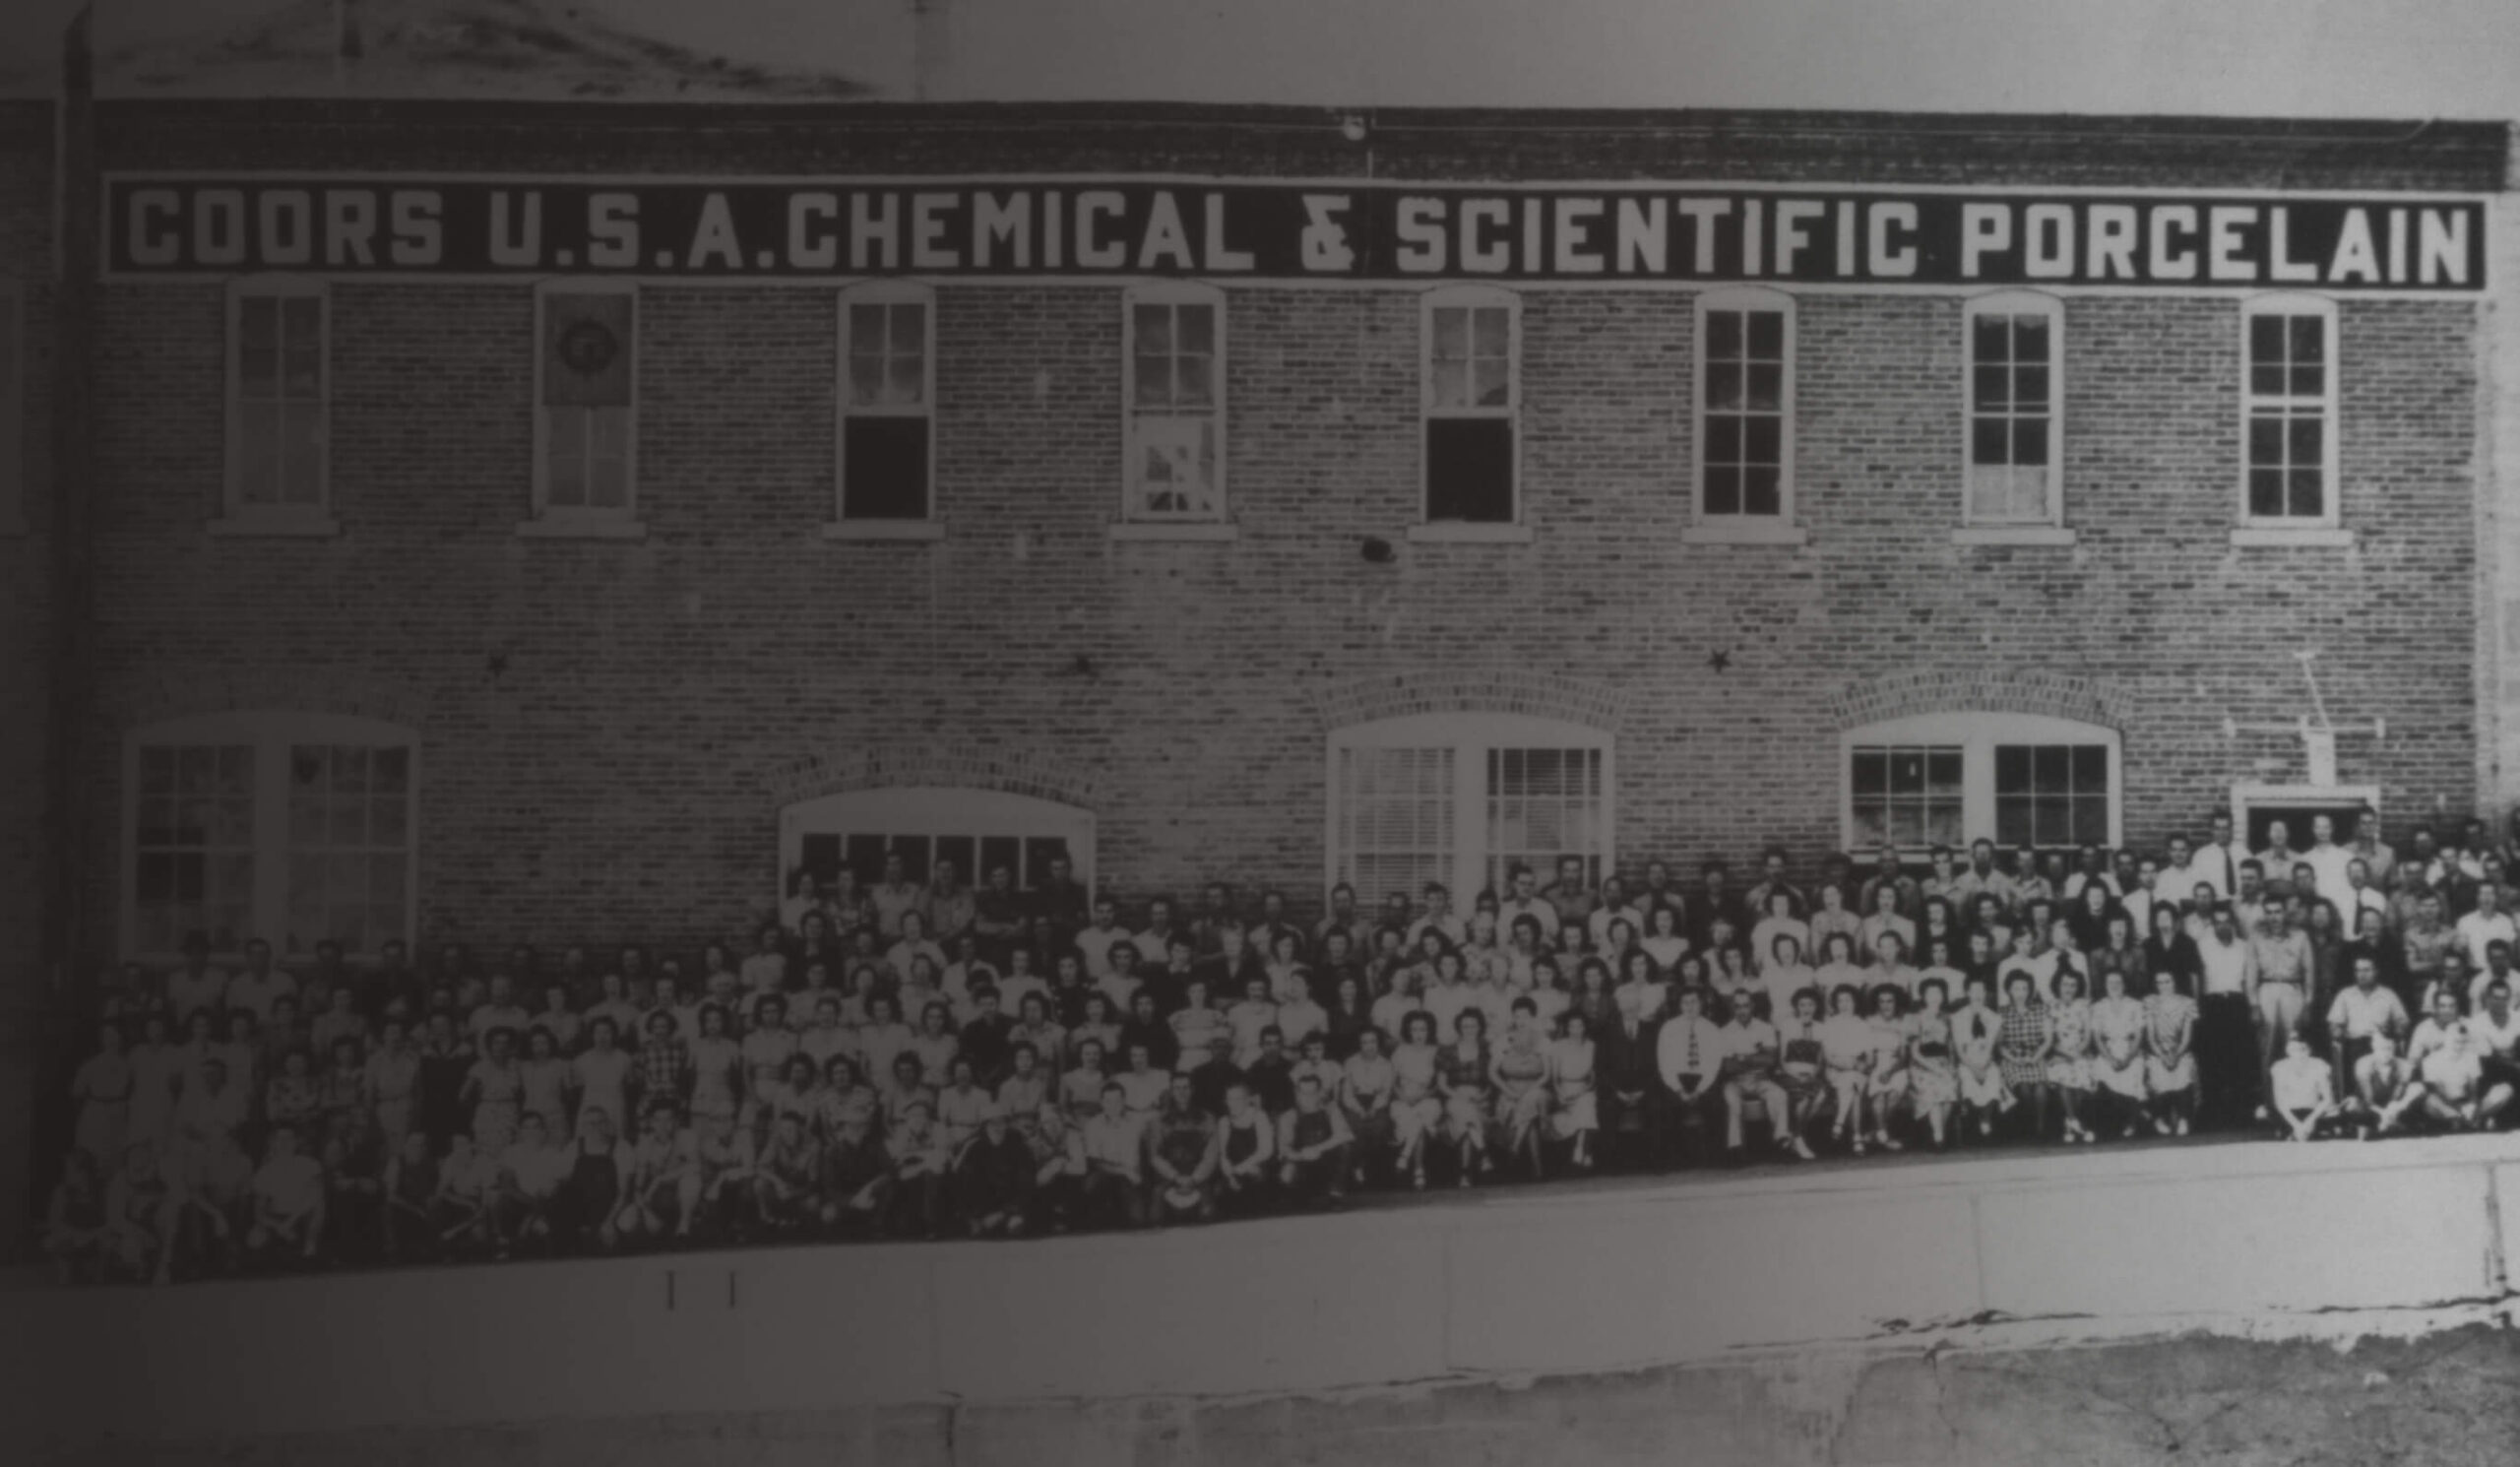 A black and white image of Coors Porcelain Company employees standing outside of the Coors Porcelain Company building.